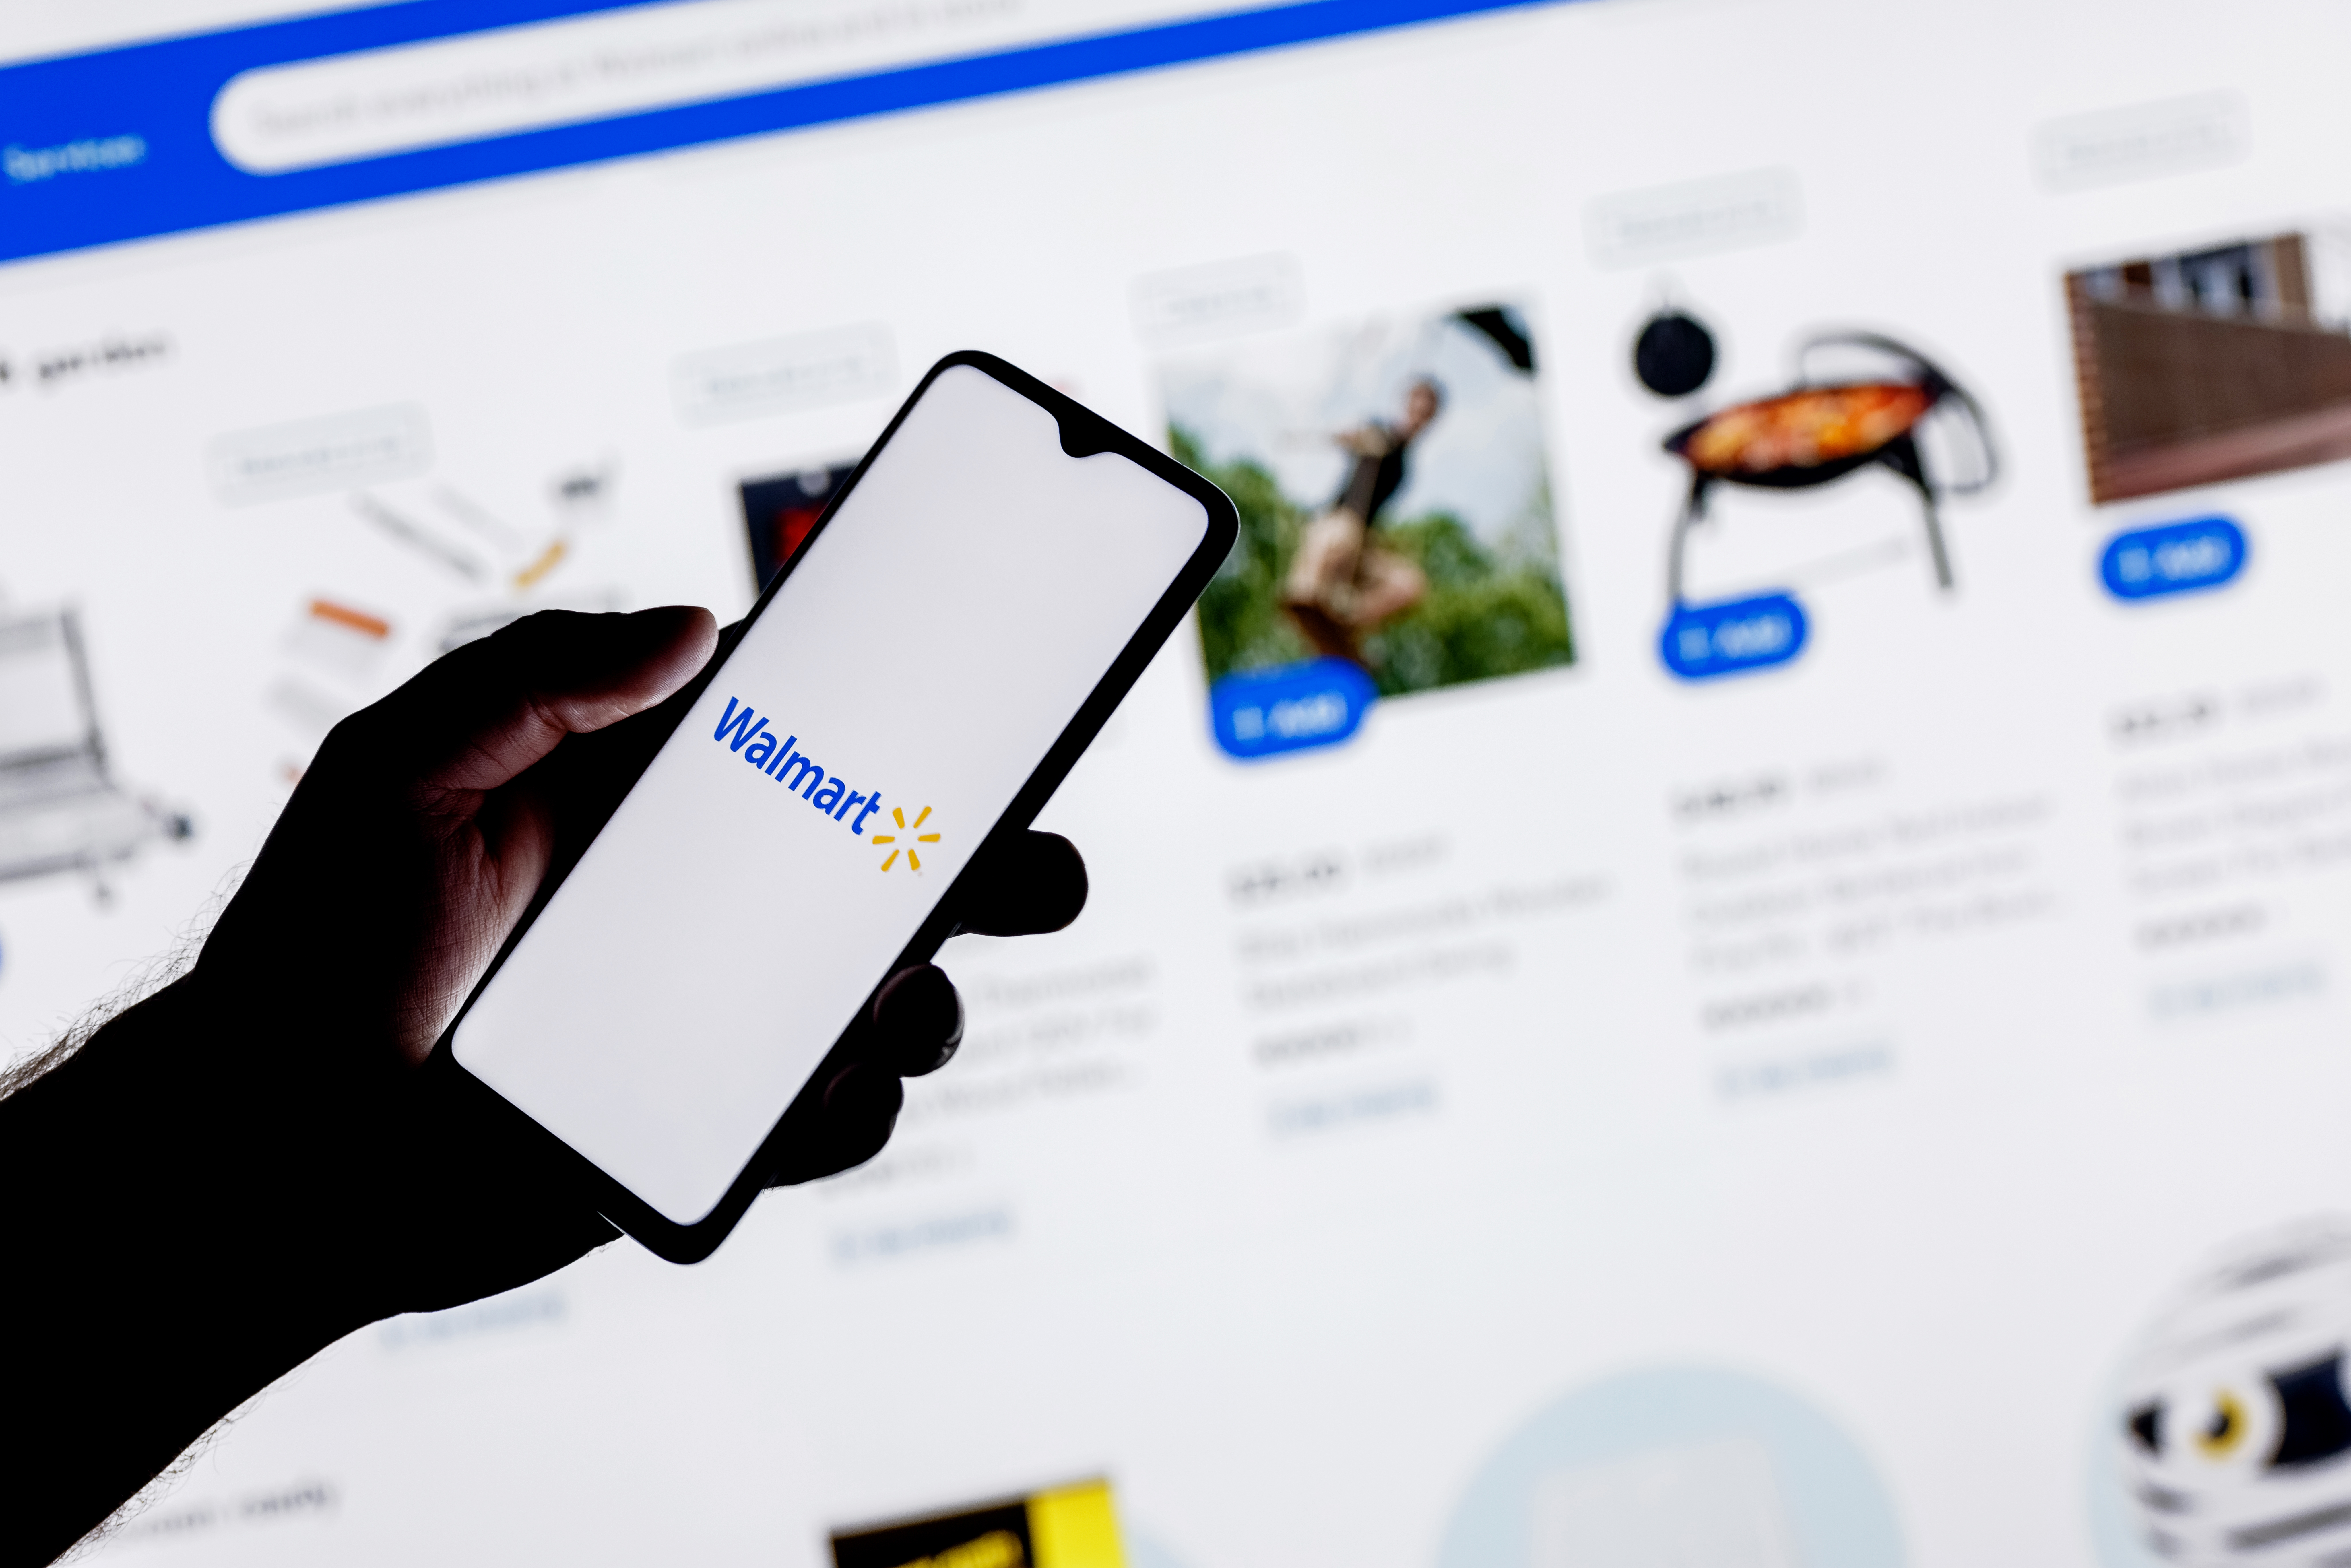 Person holding a smartphone with the Walmart logo on it